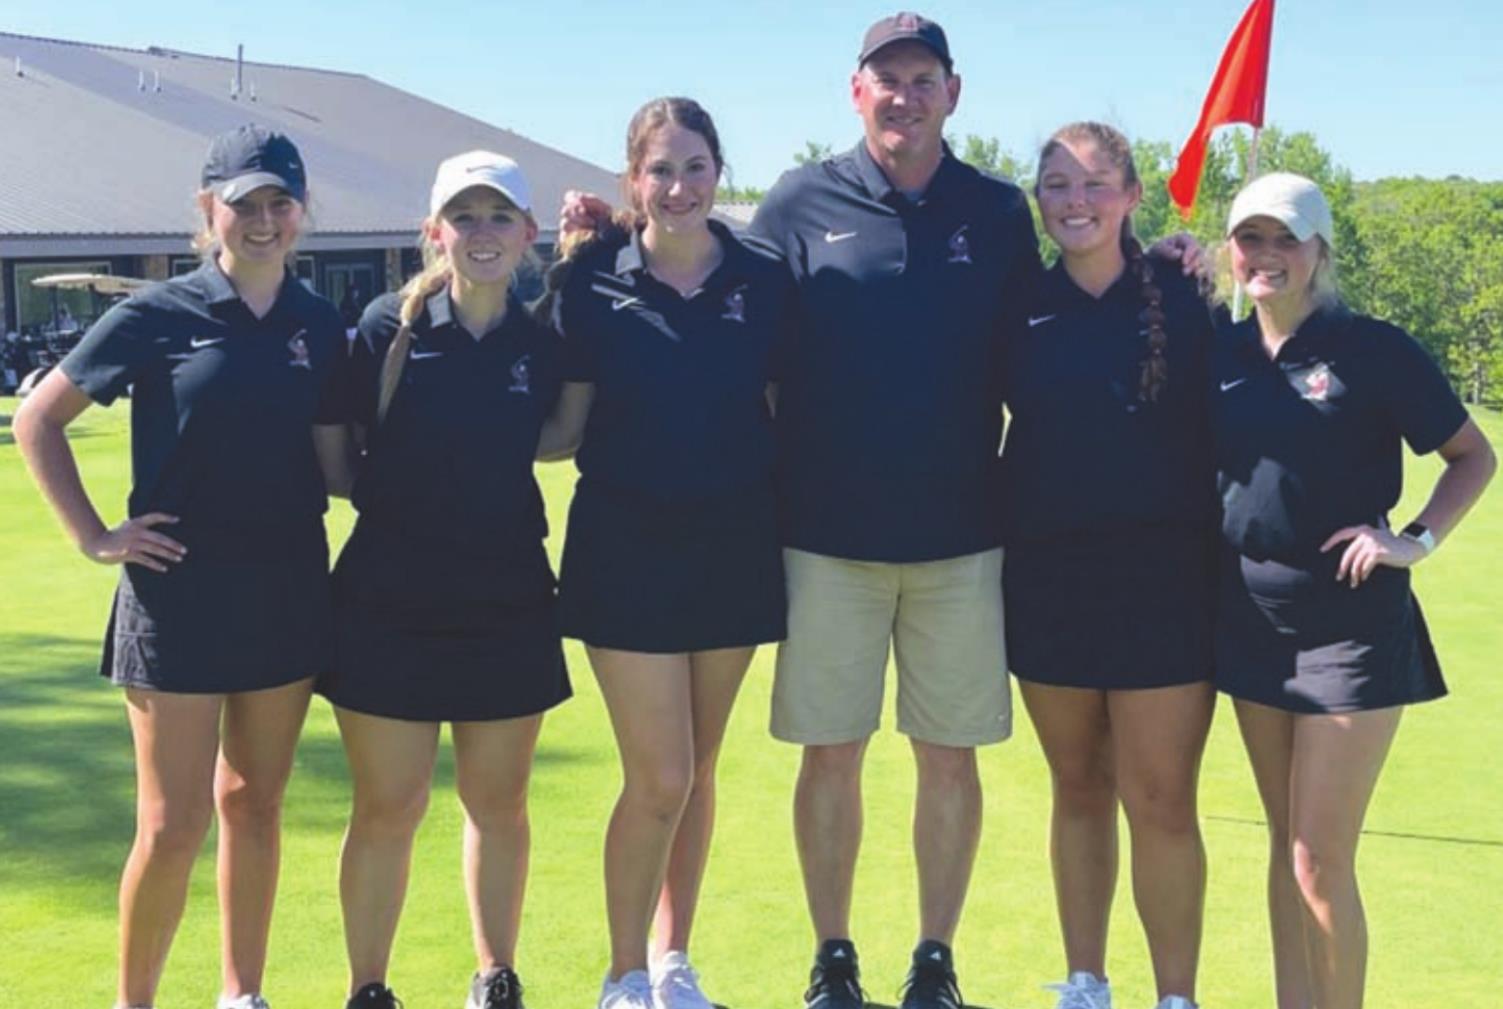 The Weatherford girls golf team finishes fifth as a team the Class 4A State Golf Tournament in Cushing. Pictured from left are McKinley Elwick, Rachel Carruth, Maddy Hada, coach Kyle Mickley, Chloe Cummins and Addison Elwick. Provided